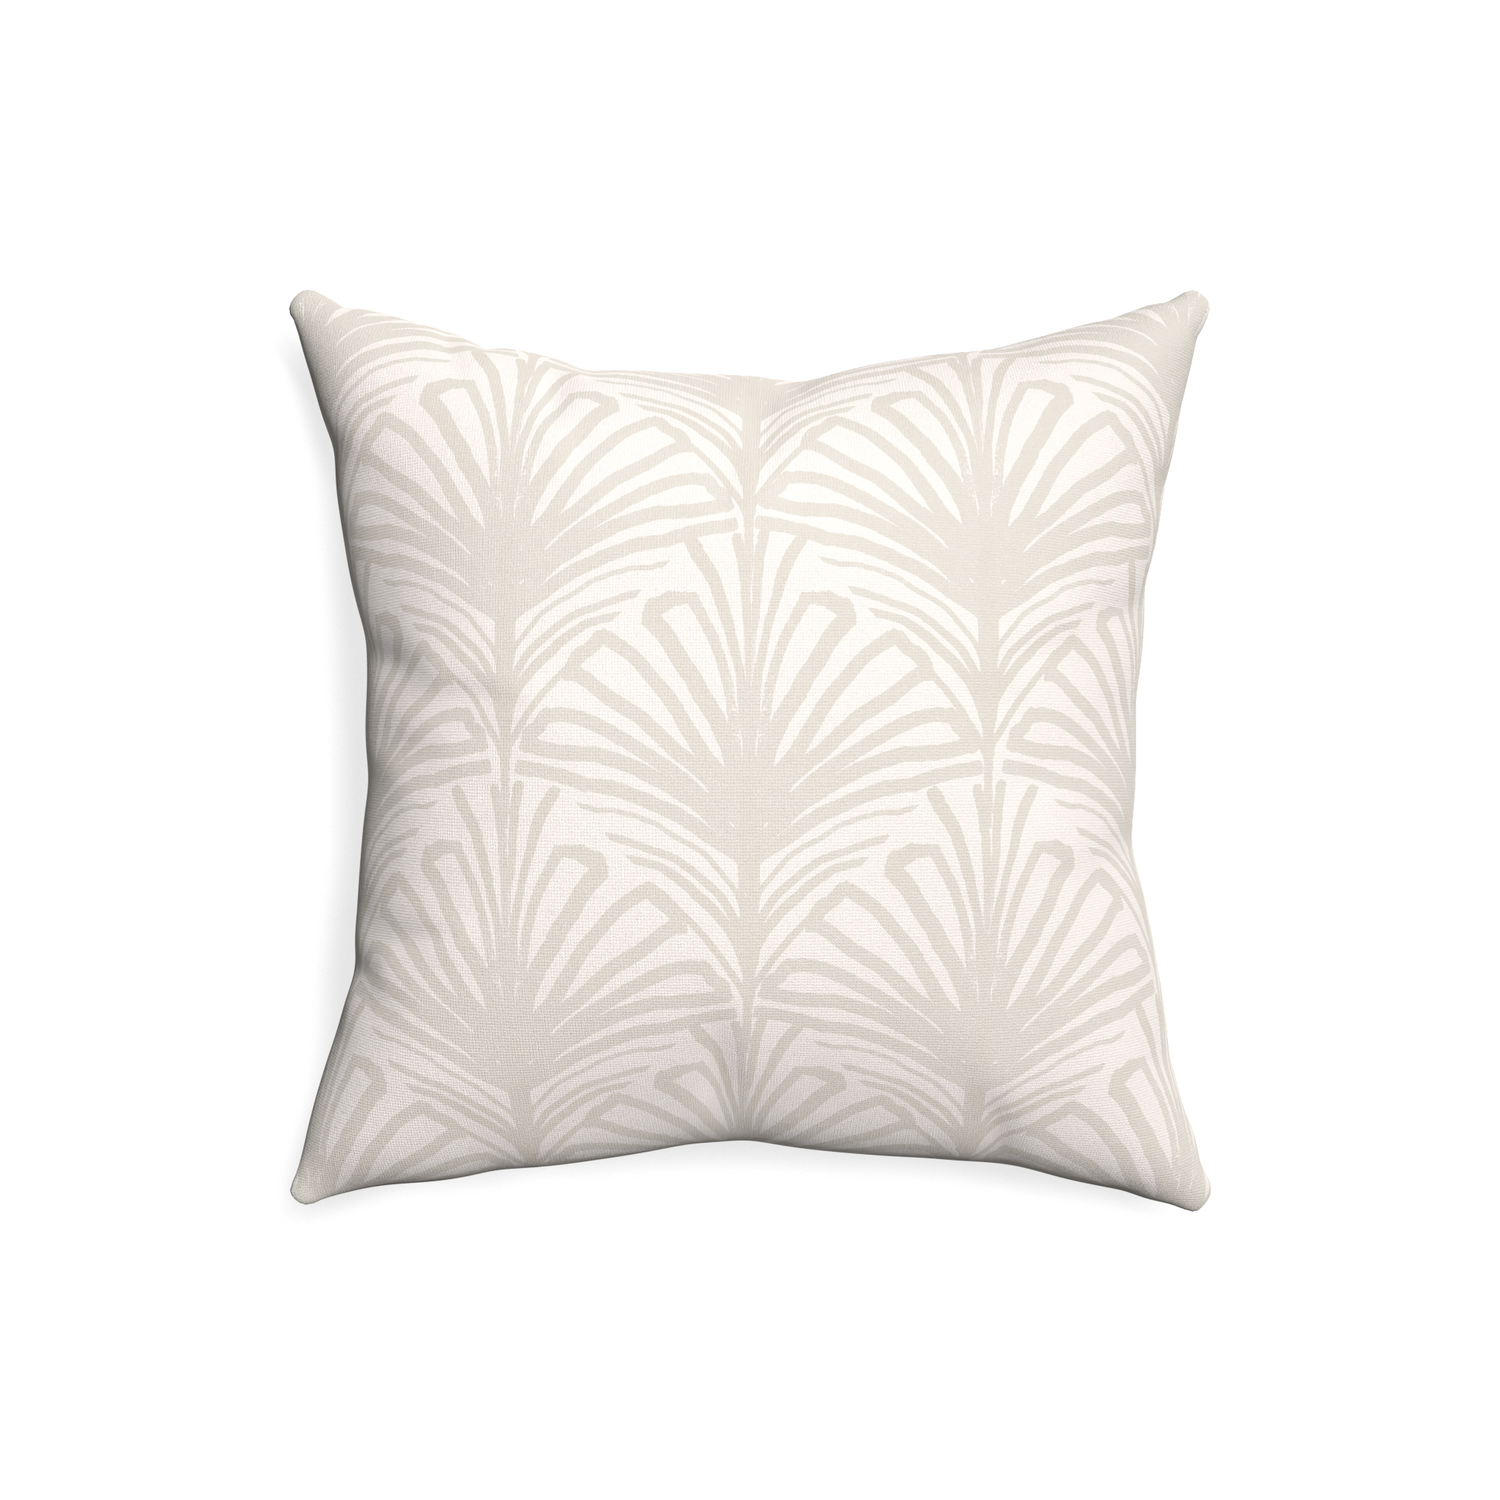 20-square suzy sand custom pillow with none on white background